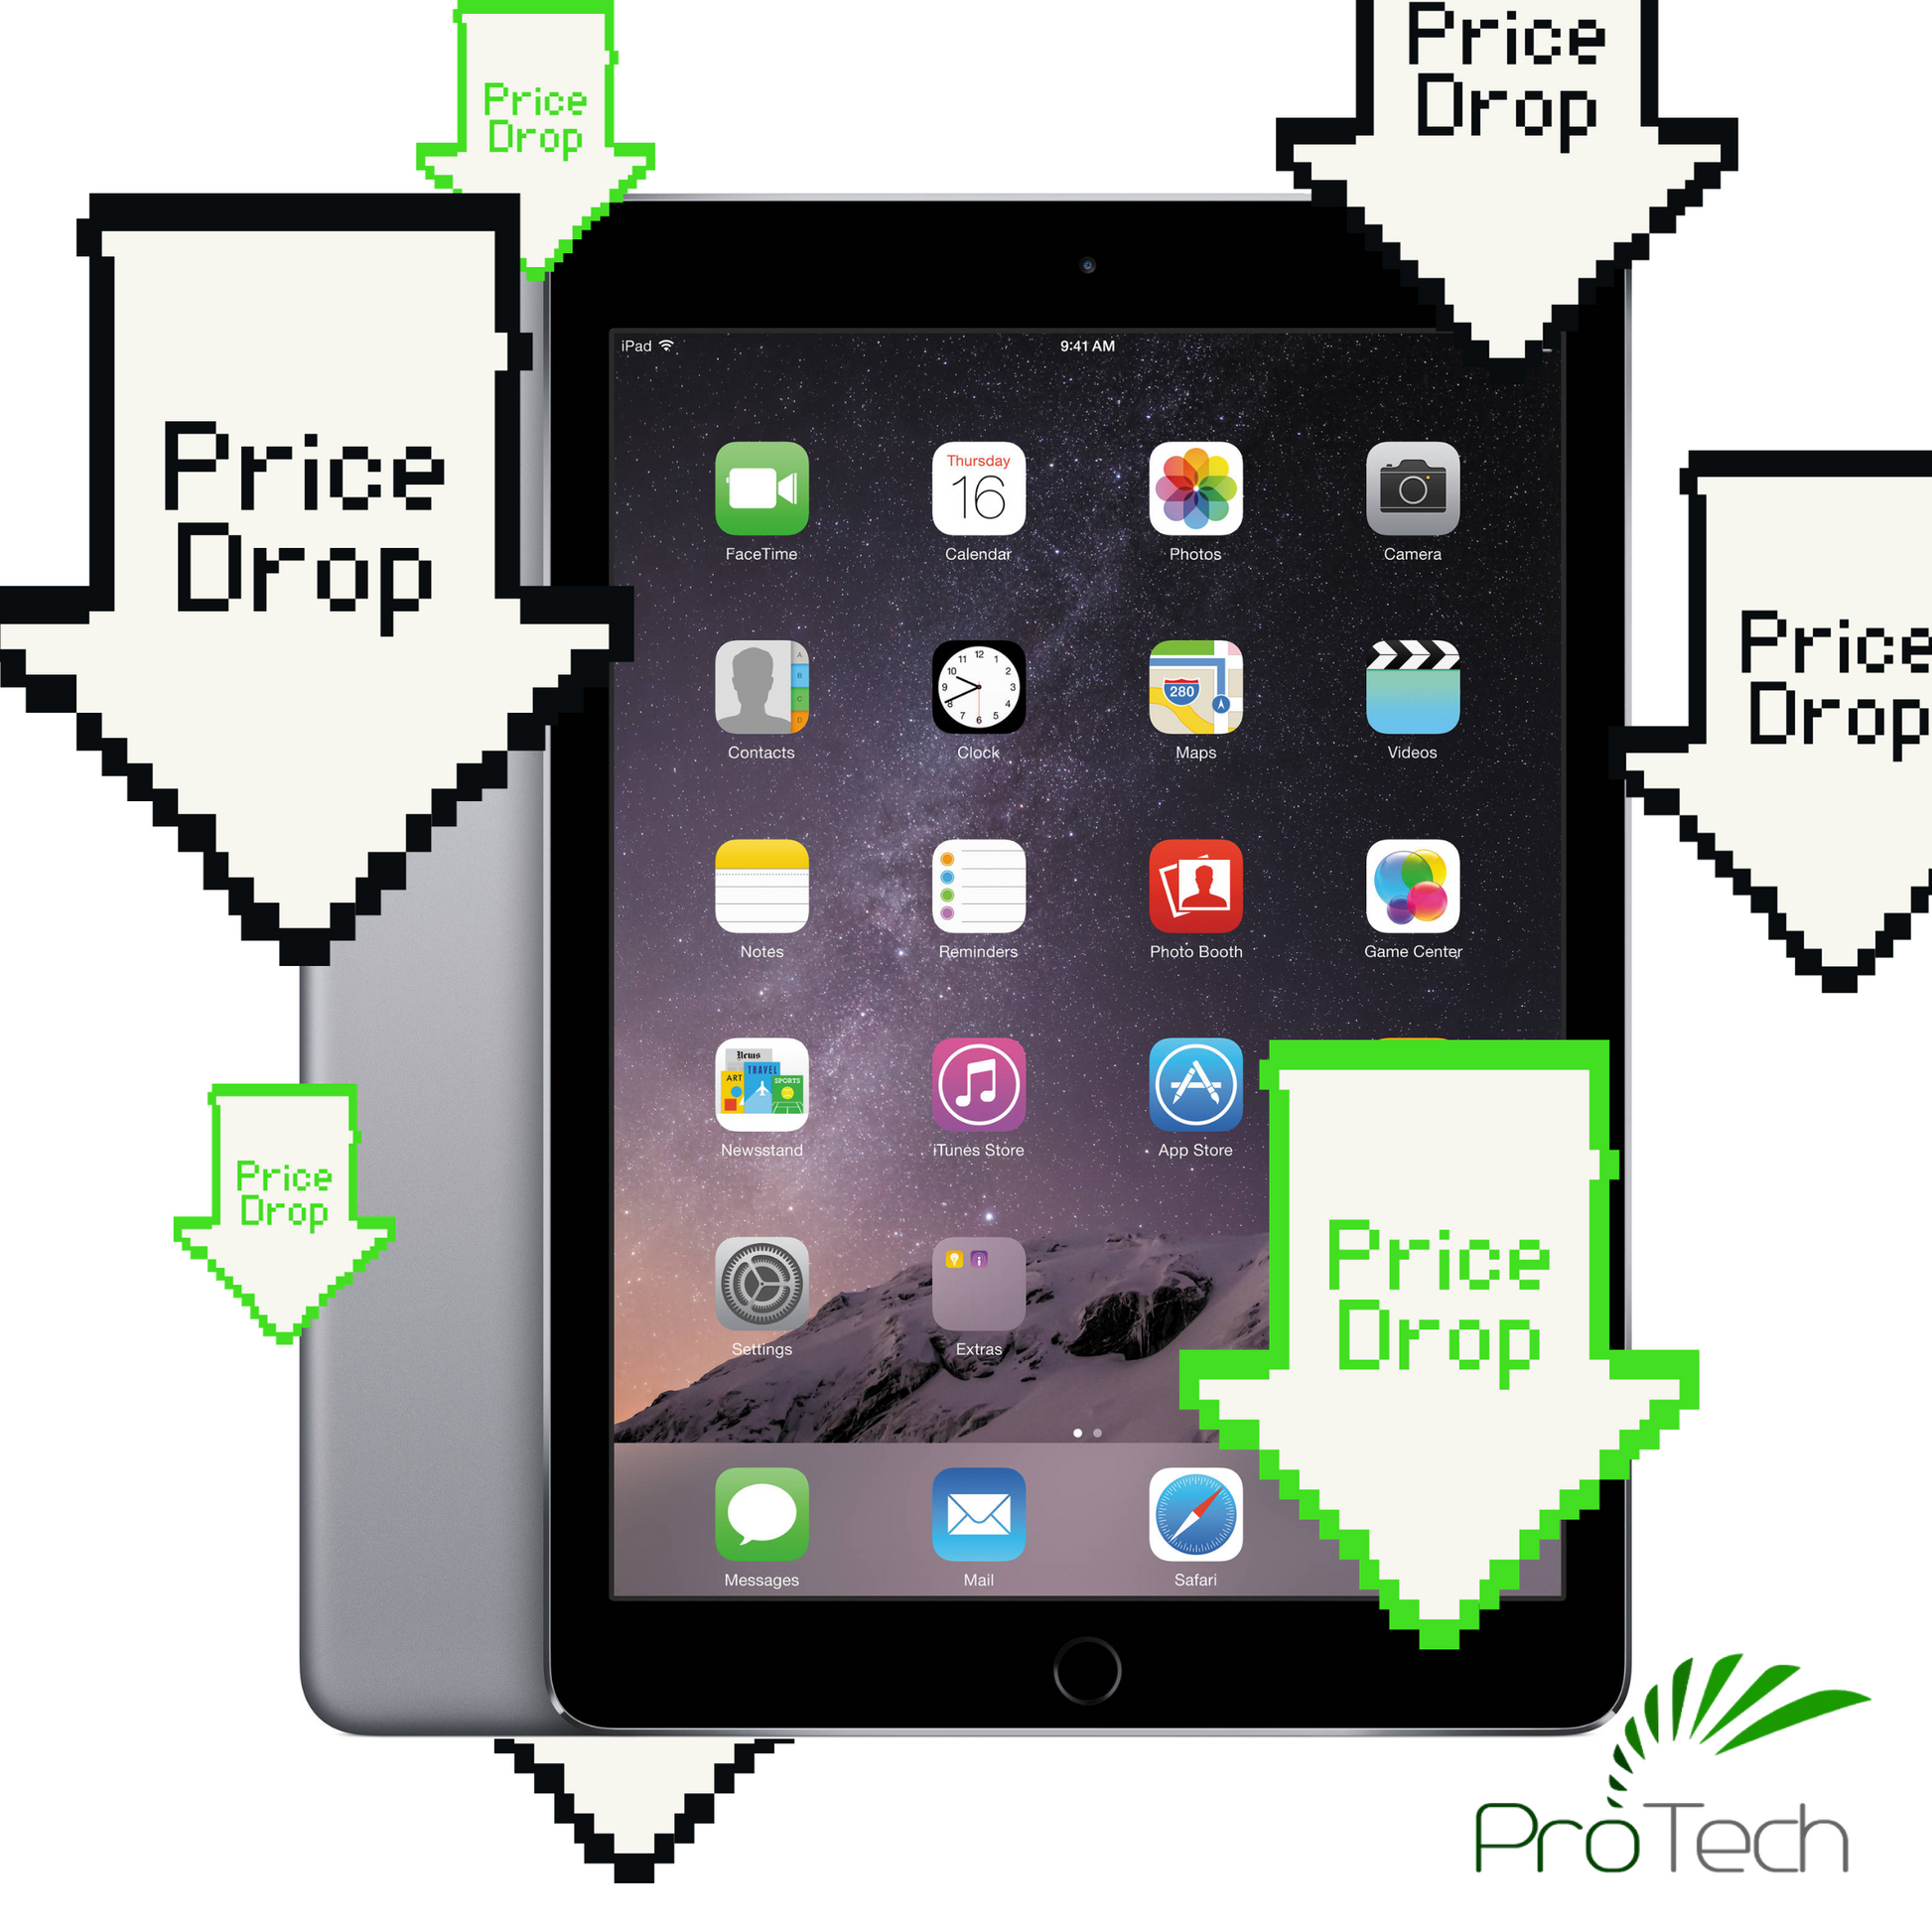 Apple iPad Air 1 A1474 | WIFI | 32GB ProTech I.T. Solutions